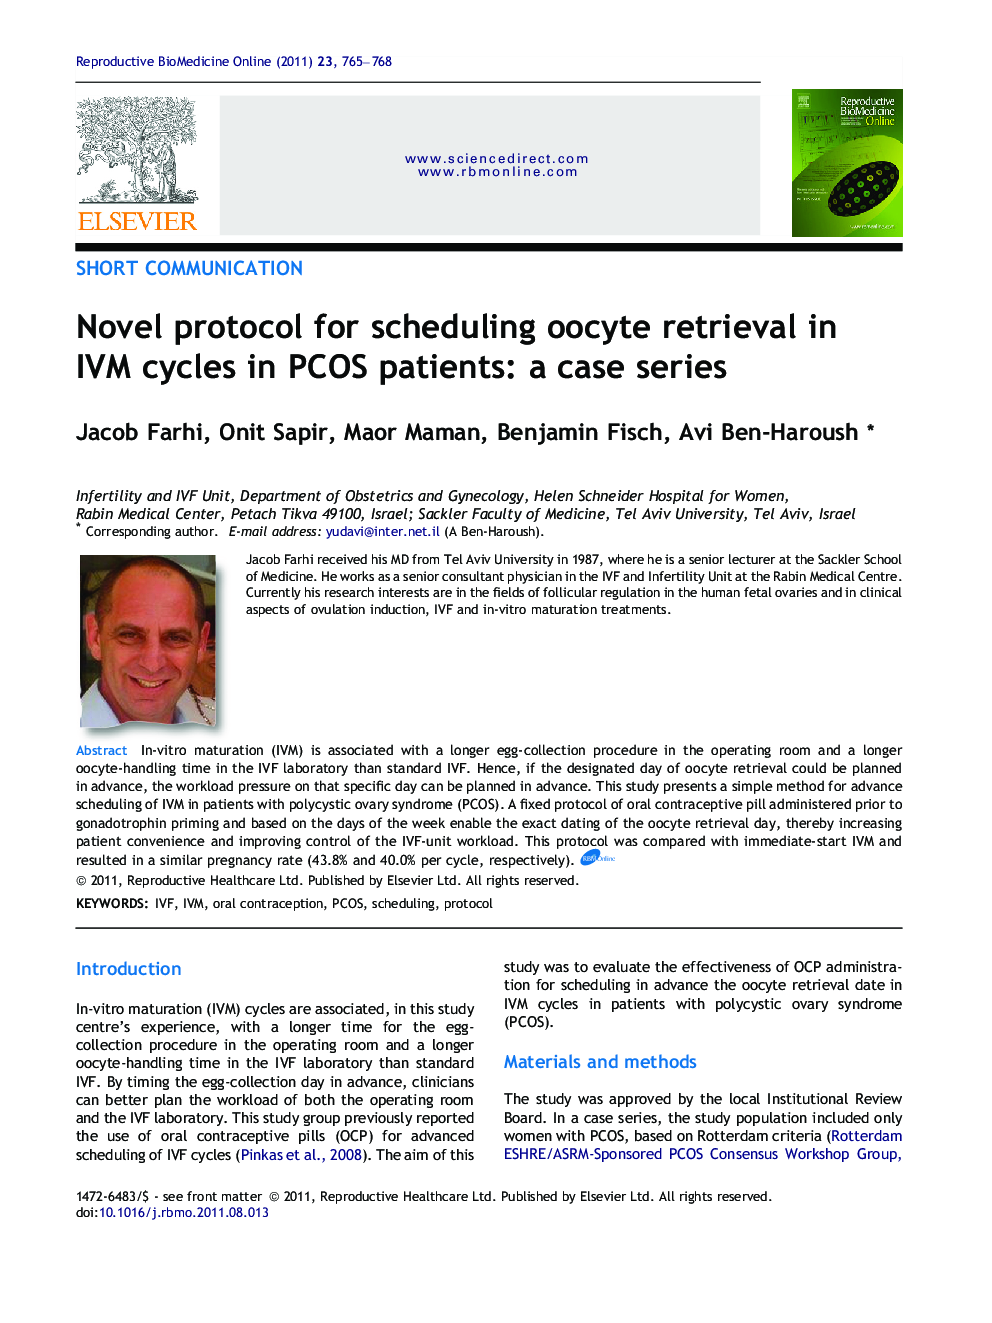 Novel protocol for scheduling oocyte retrieval in IVM cycles in PCOS patients: a case series 